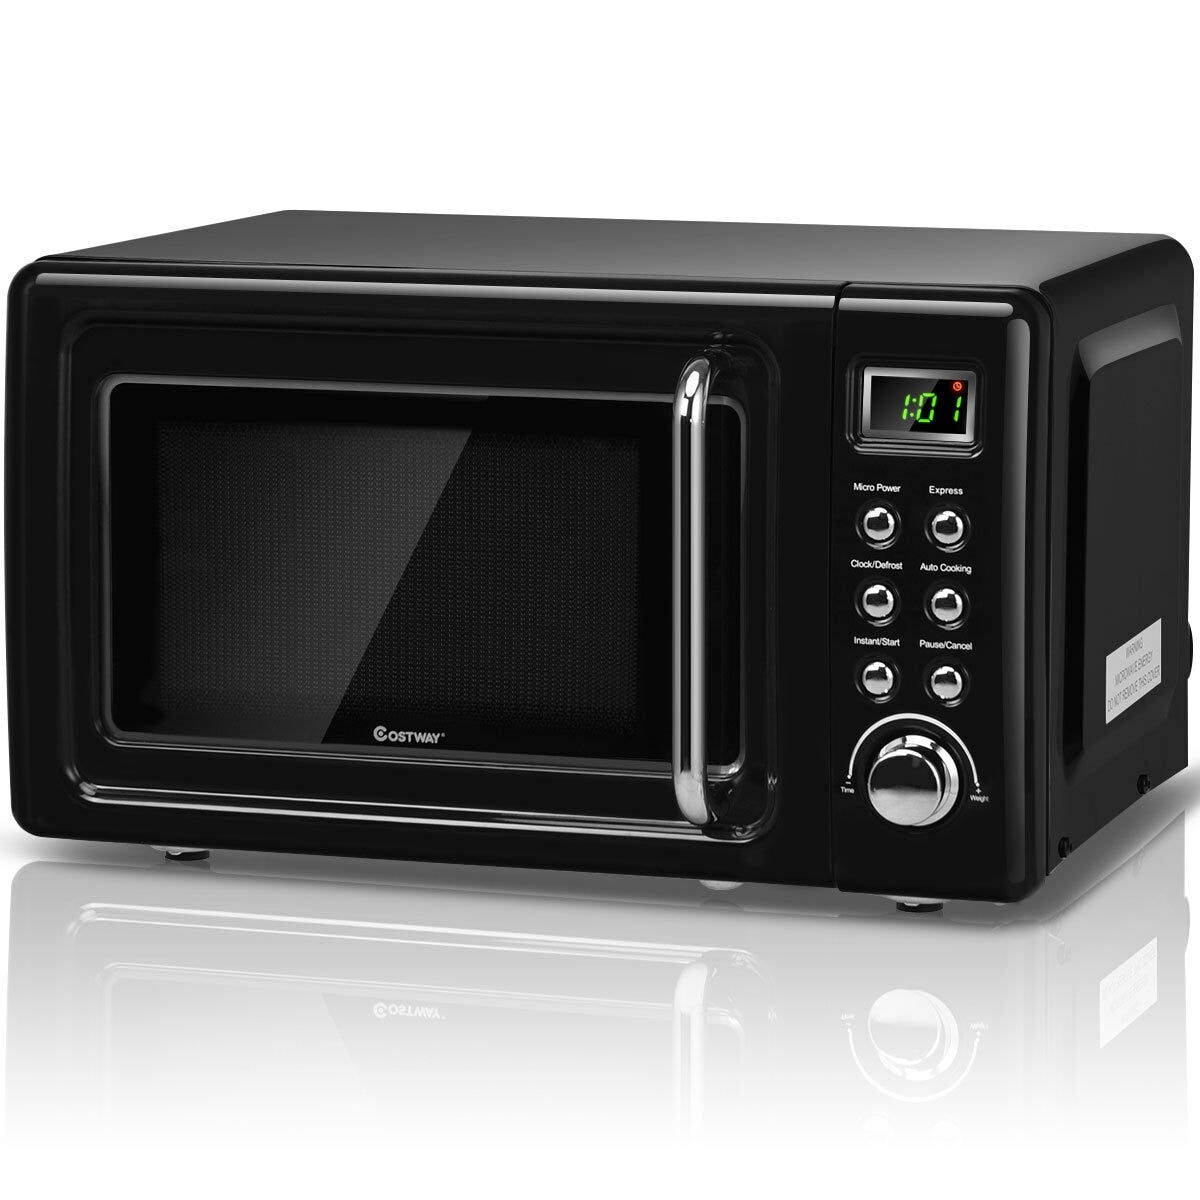 https://ak1.ostkcdn.com/images/products/is/images/direct/25829154cf15902204547be9ff07b9bed0abfb45/Costway-0.7Cu.ft-Retro-Countertop-Microwave-Oven-700W-LED-Display-Glass-Turntable-BlackWhite.jpg